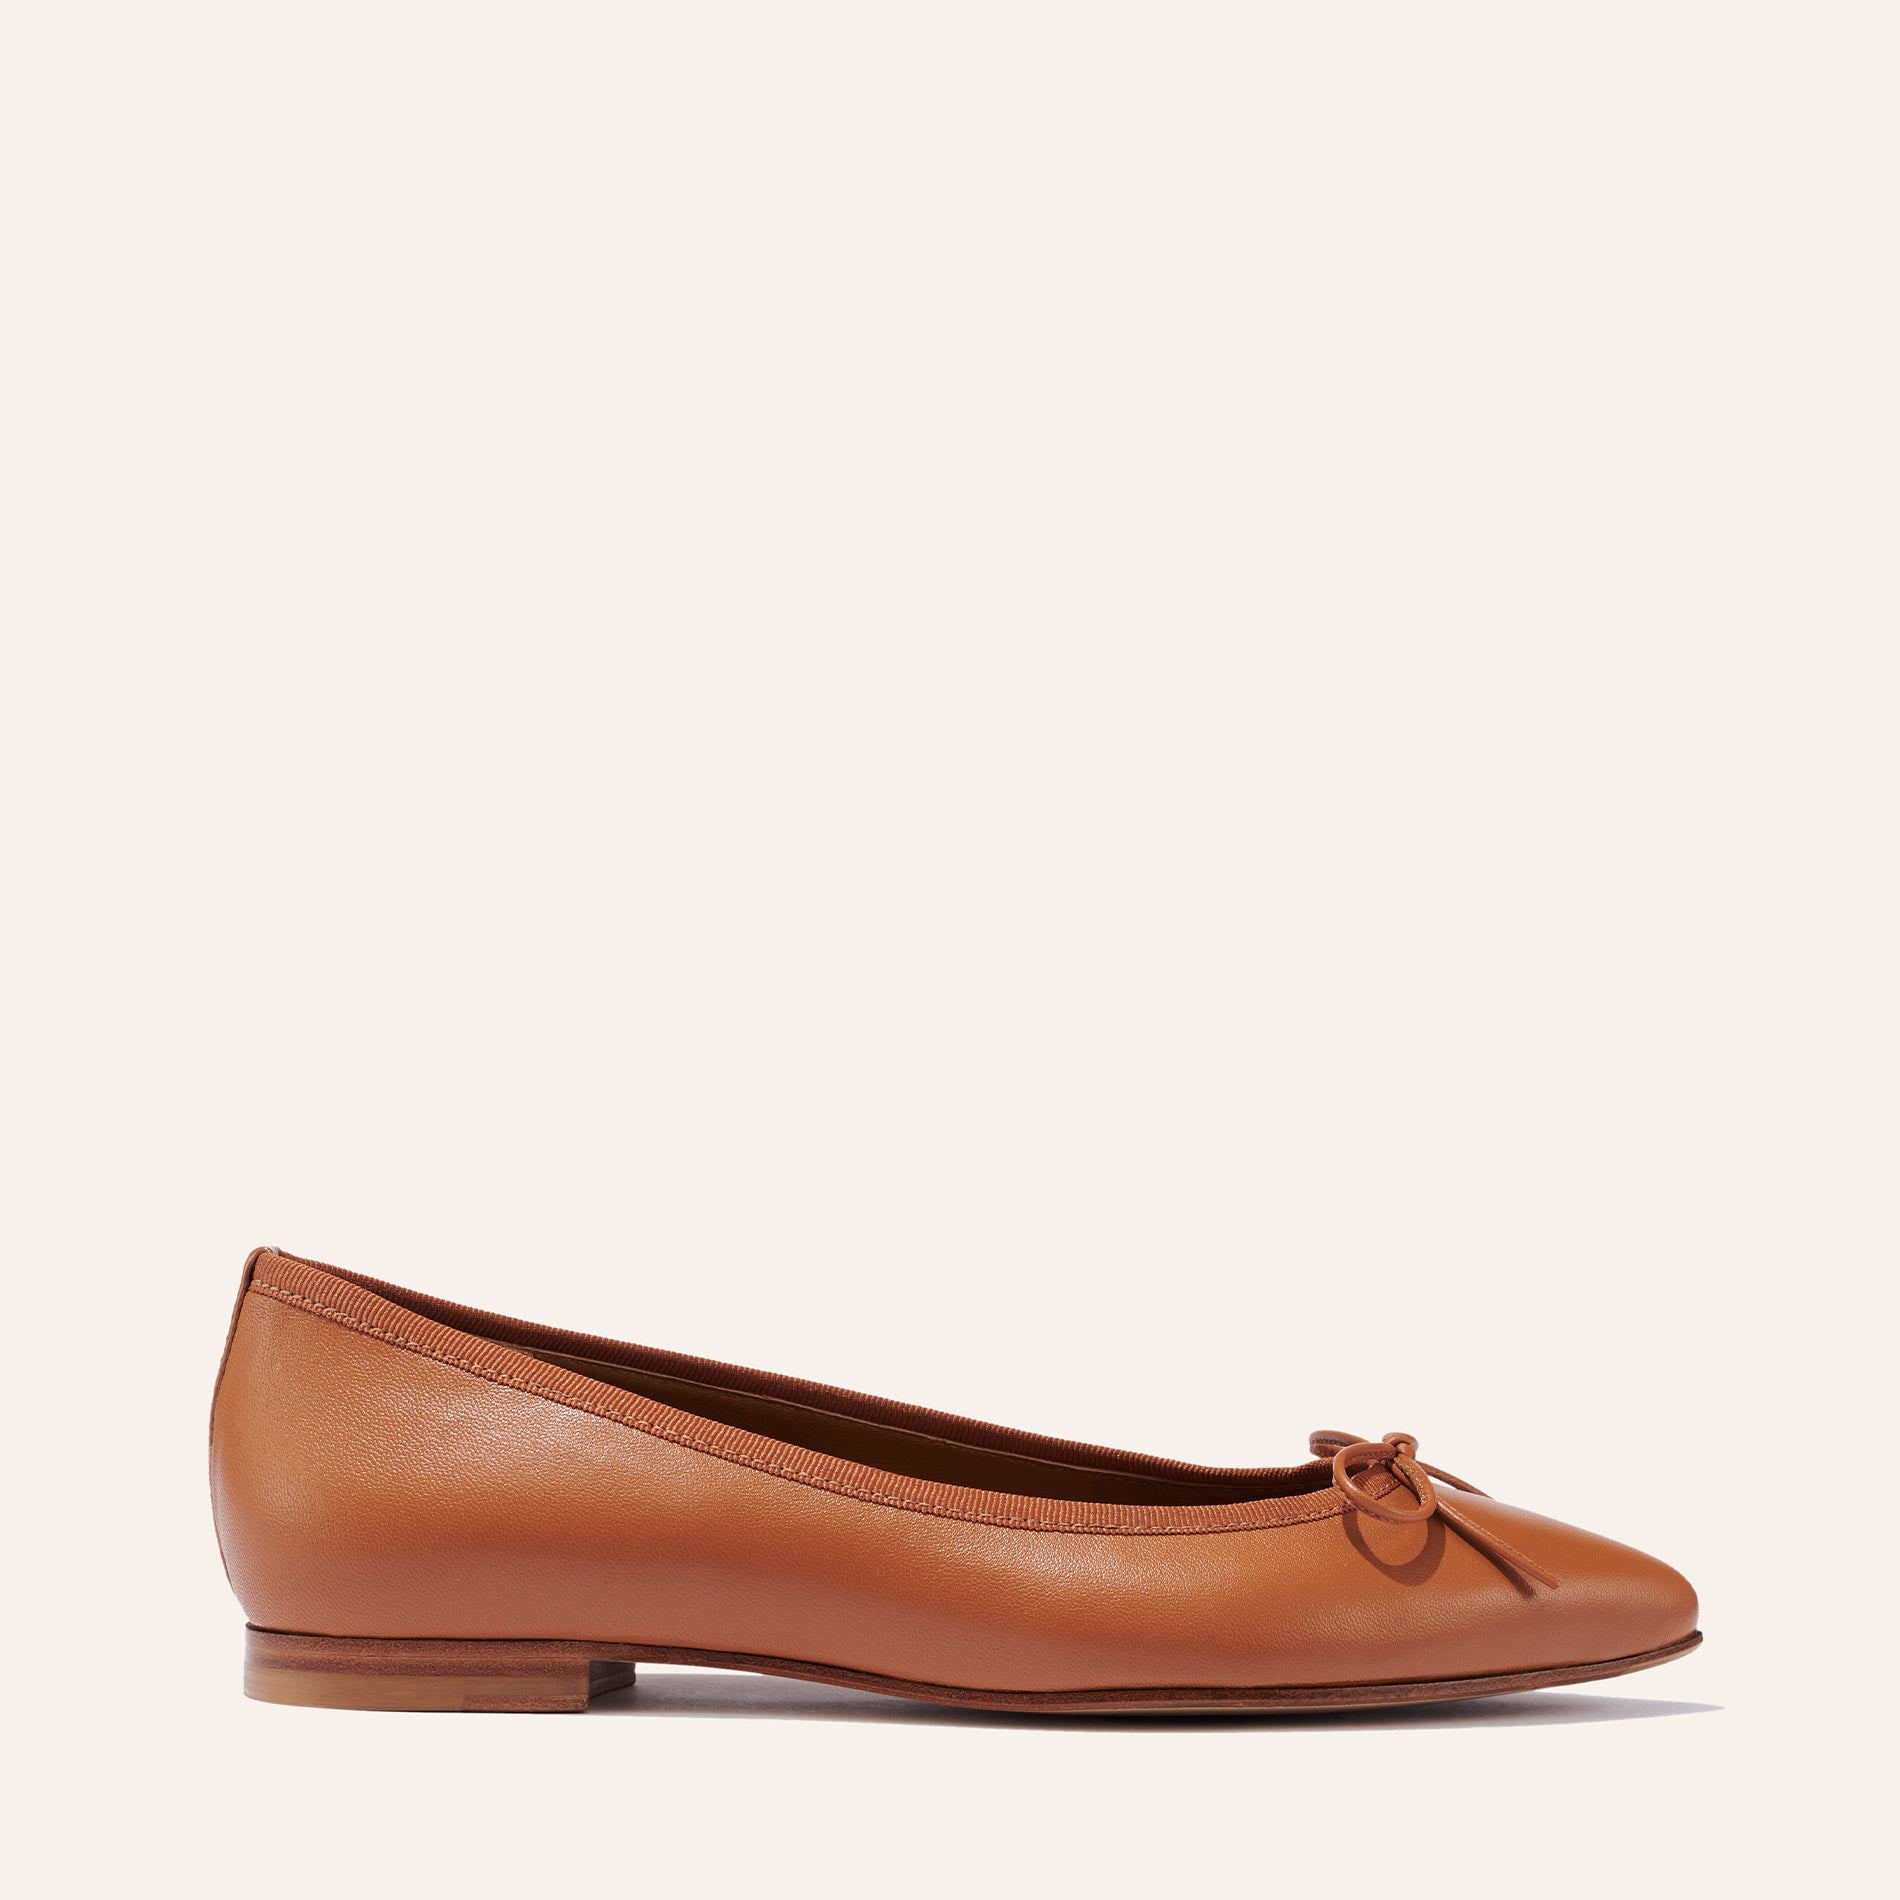 Margaux's classic and comfortable Pointe ballet flat in soft, saddle brown Italian nappa leather with an elegant pointed toe